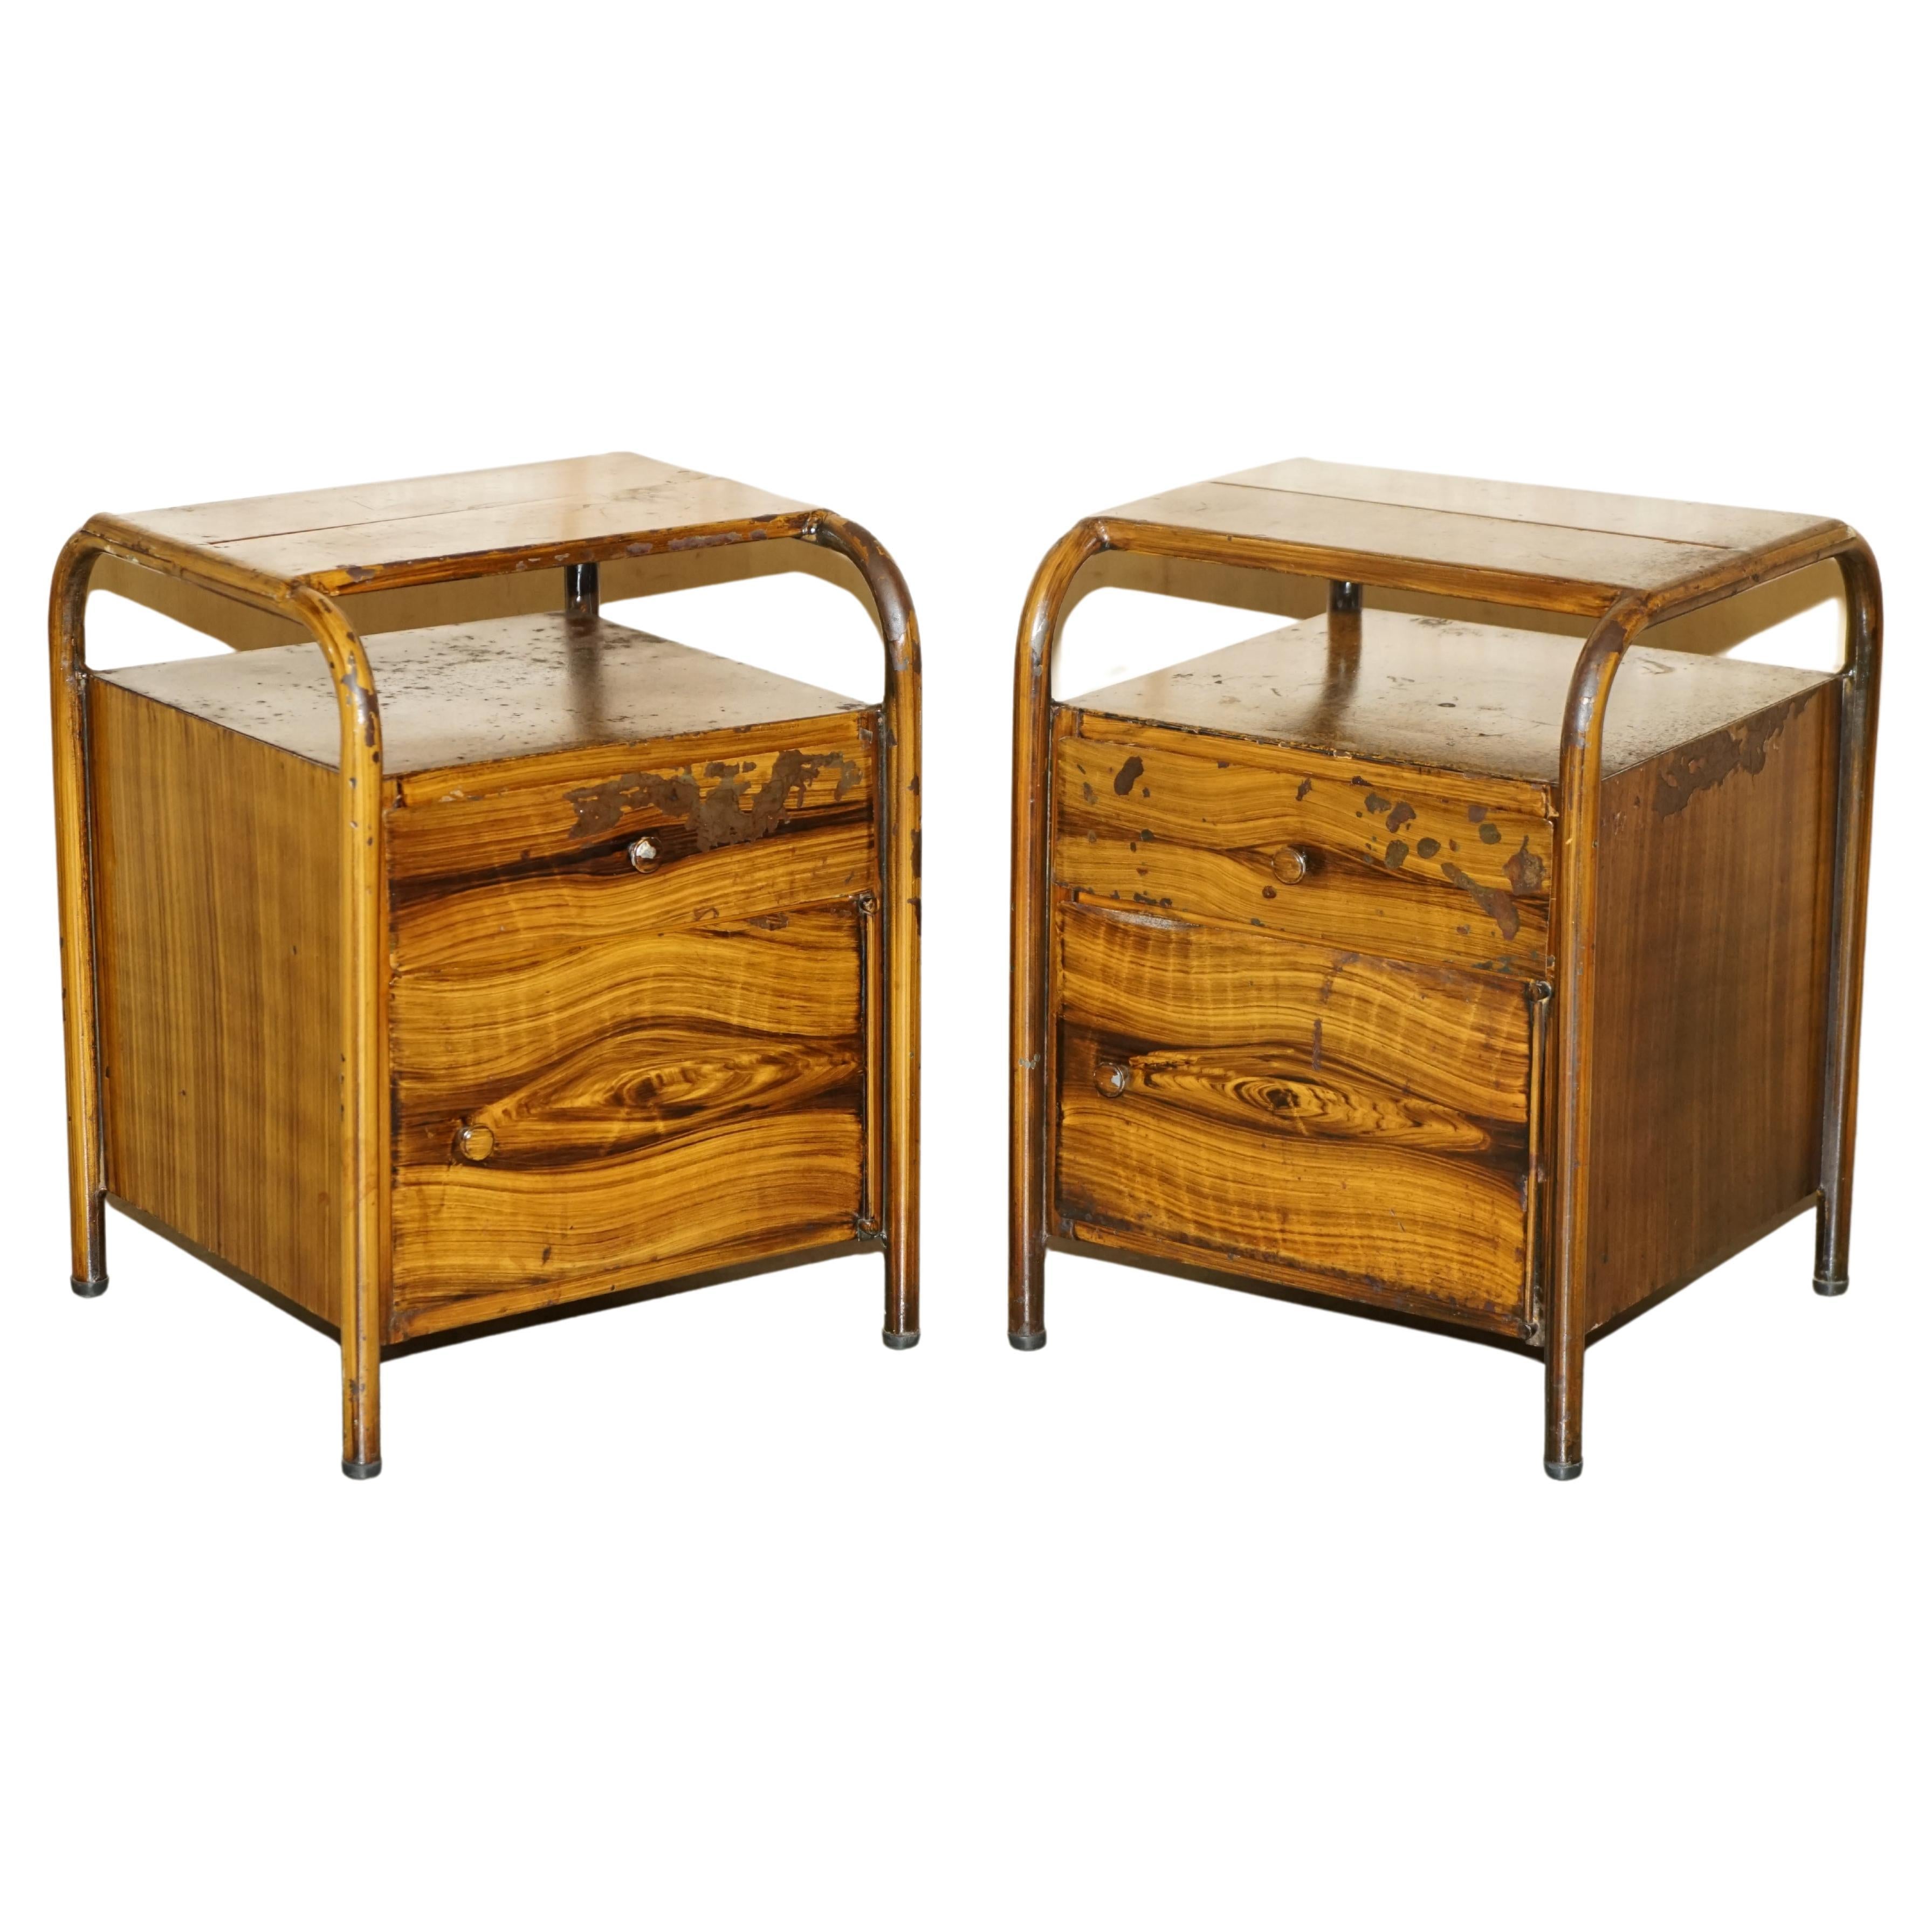 Pair of Antique Art Deco circa 1920 Metal Medical Bedside Tables Hand Painted For Sale